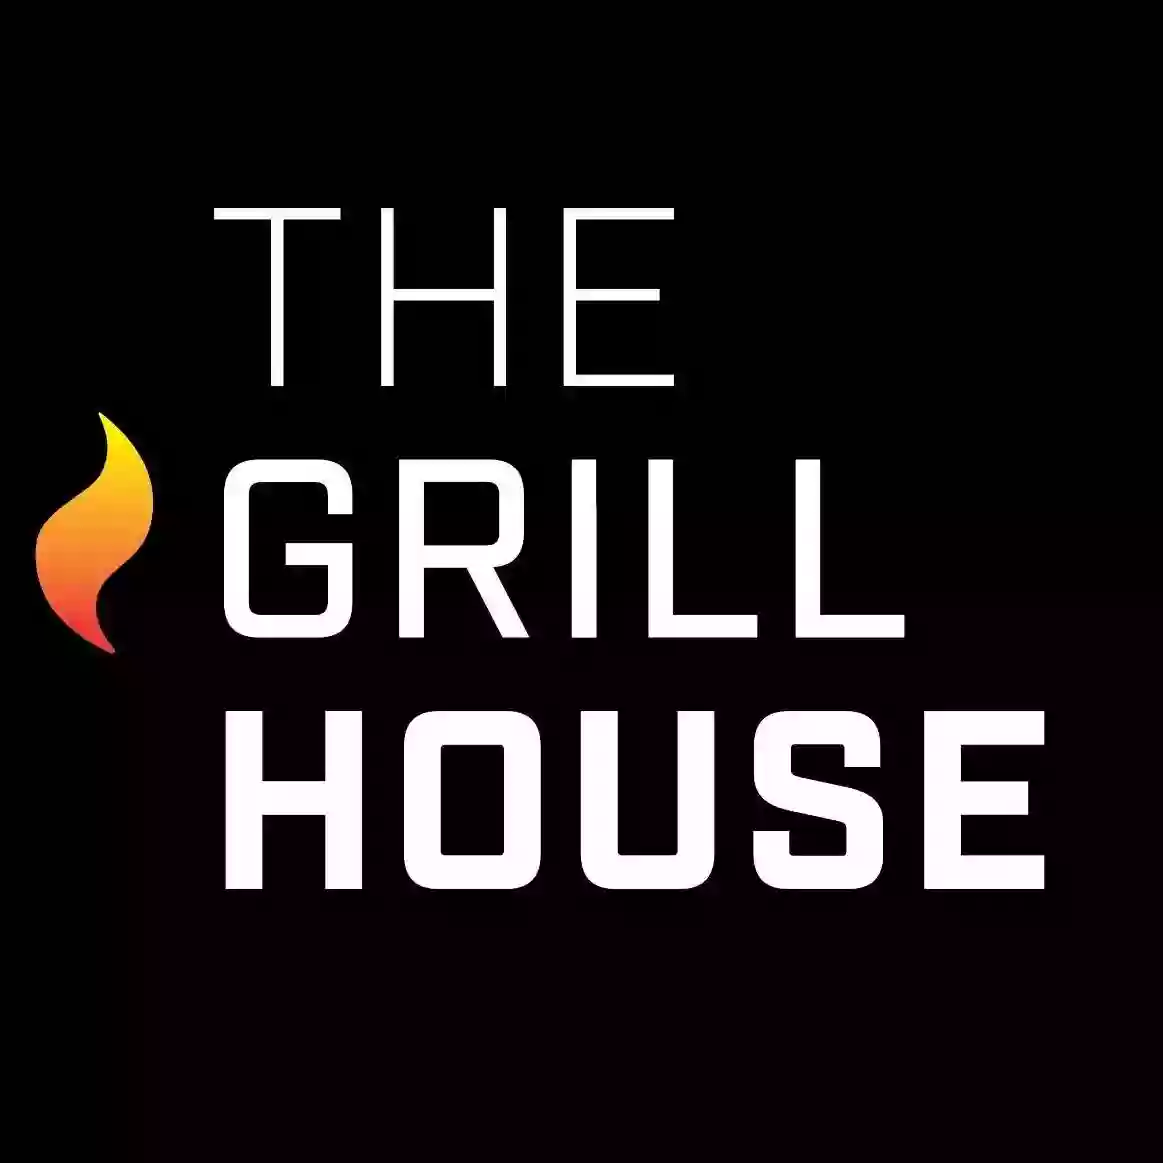 The Grillhouse